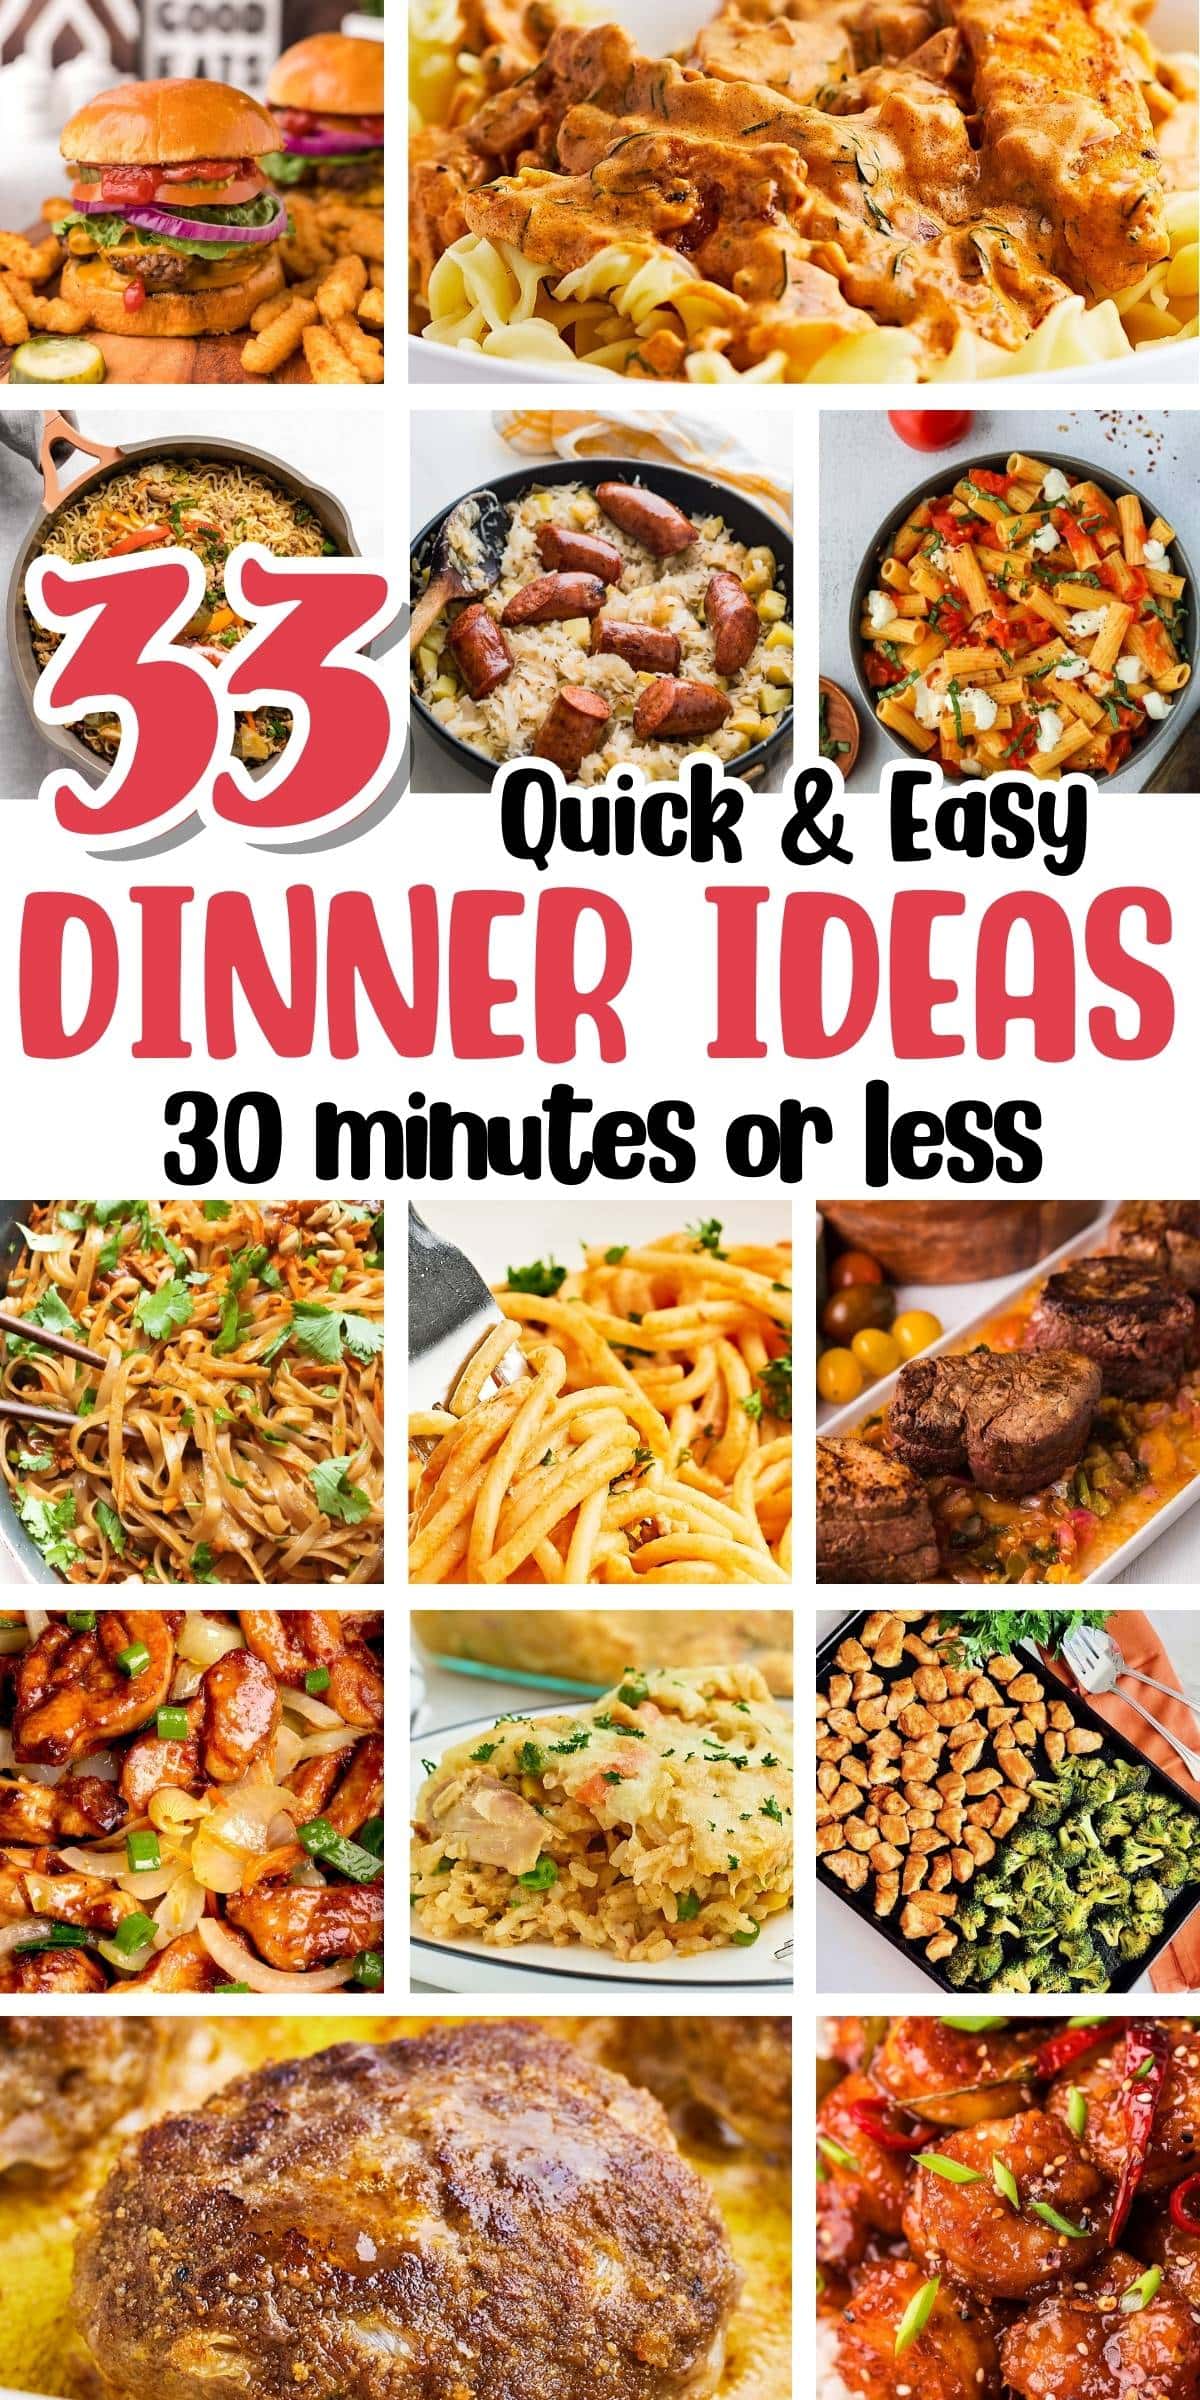 33 Quick And Easy Dinner Ideas For Busy Weeknights